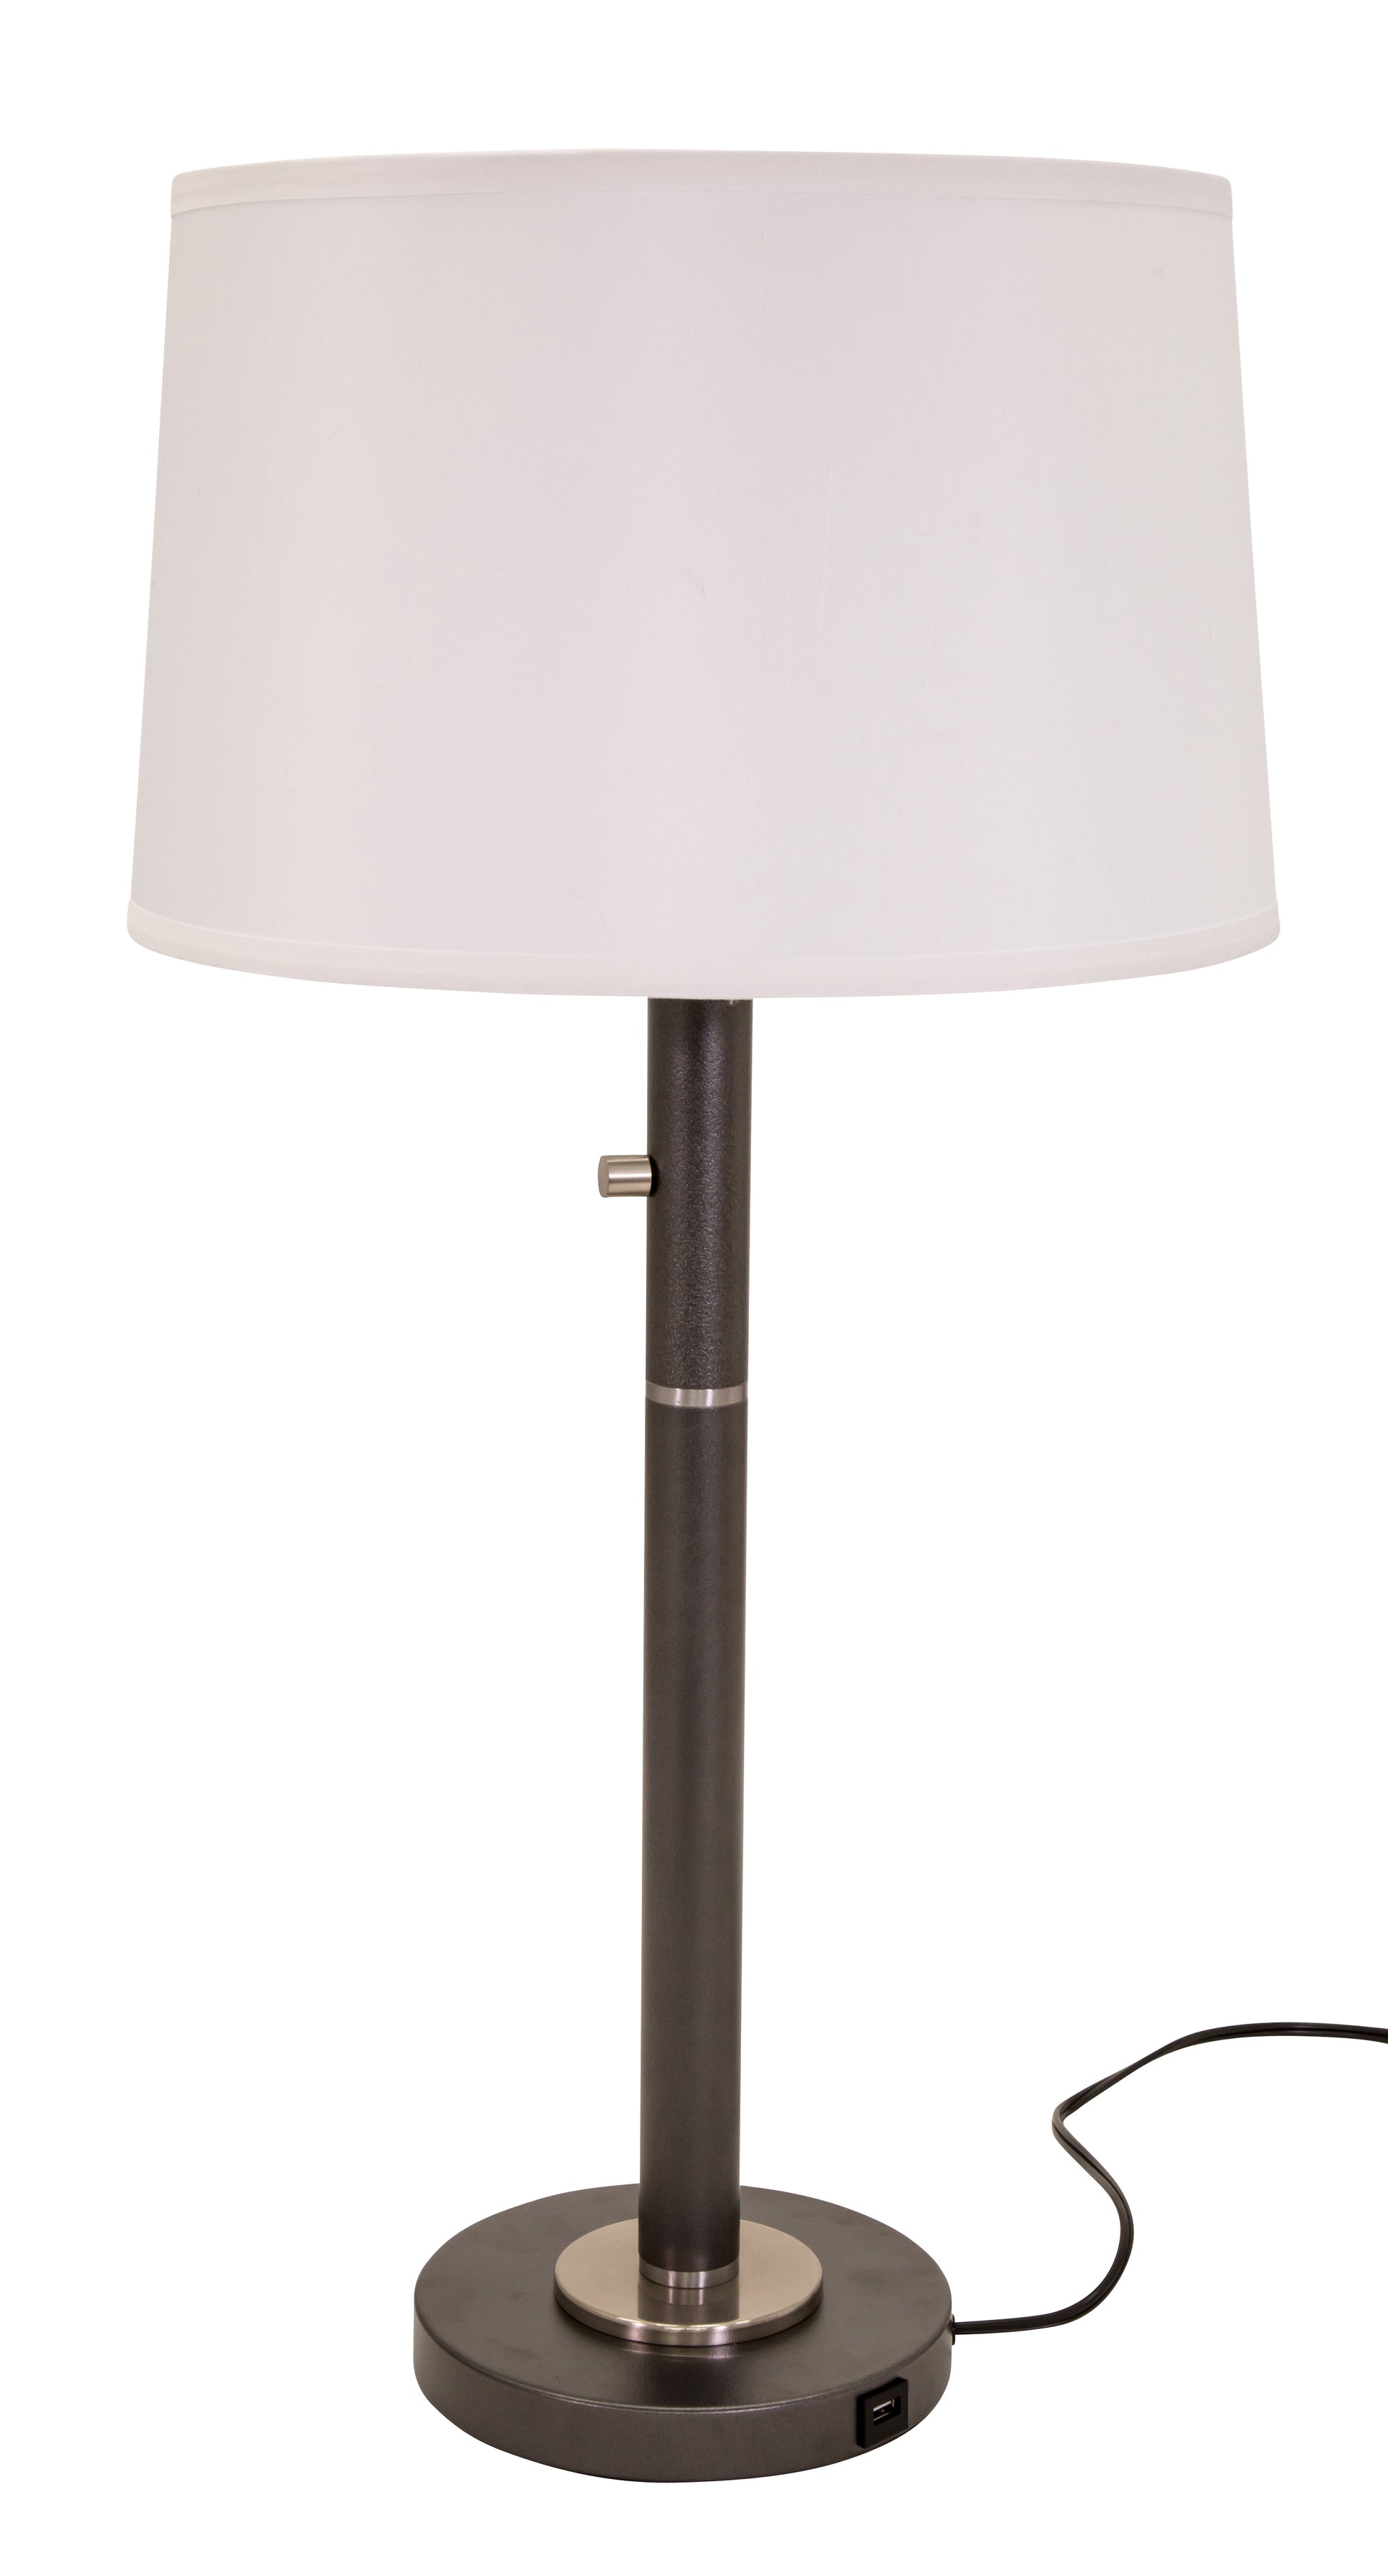 House of Troy Rupert three way table lamp in Granite with satin nickel accents and USB port RU750-GT